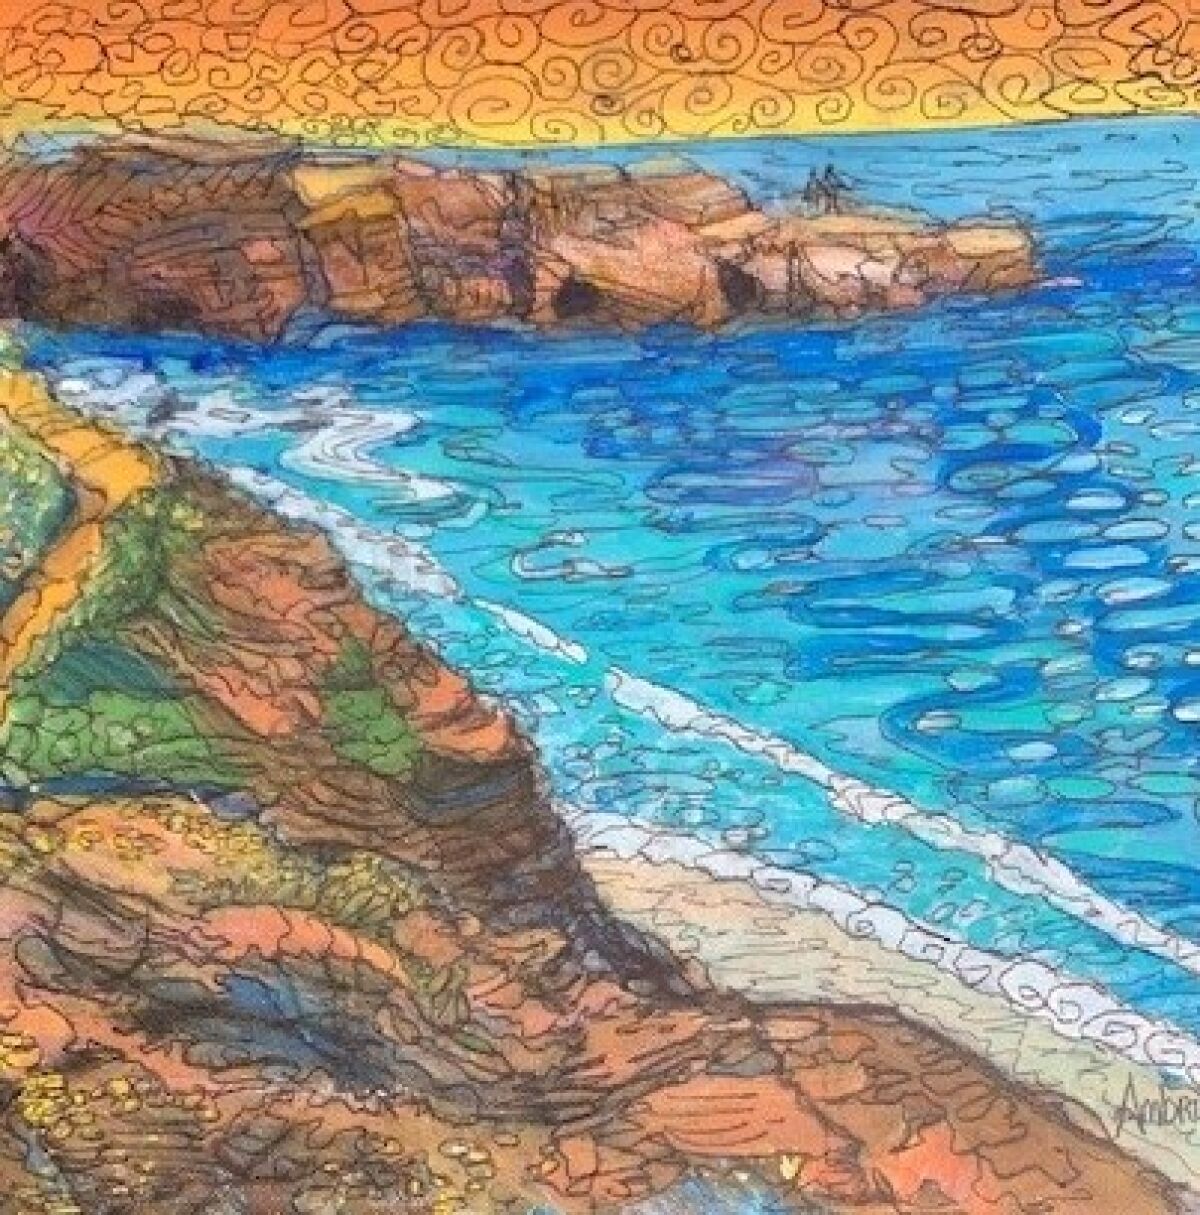 This unfinished Sunset Cliffs scene is a drawing by artist Janis Ambrosiani for a 12-by-12-foot mural.